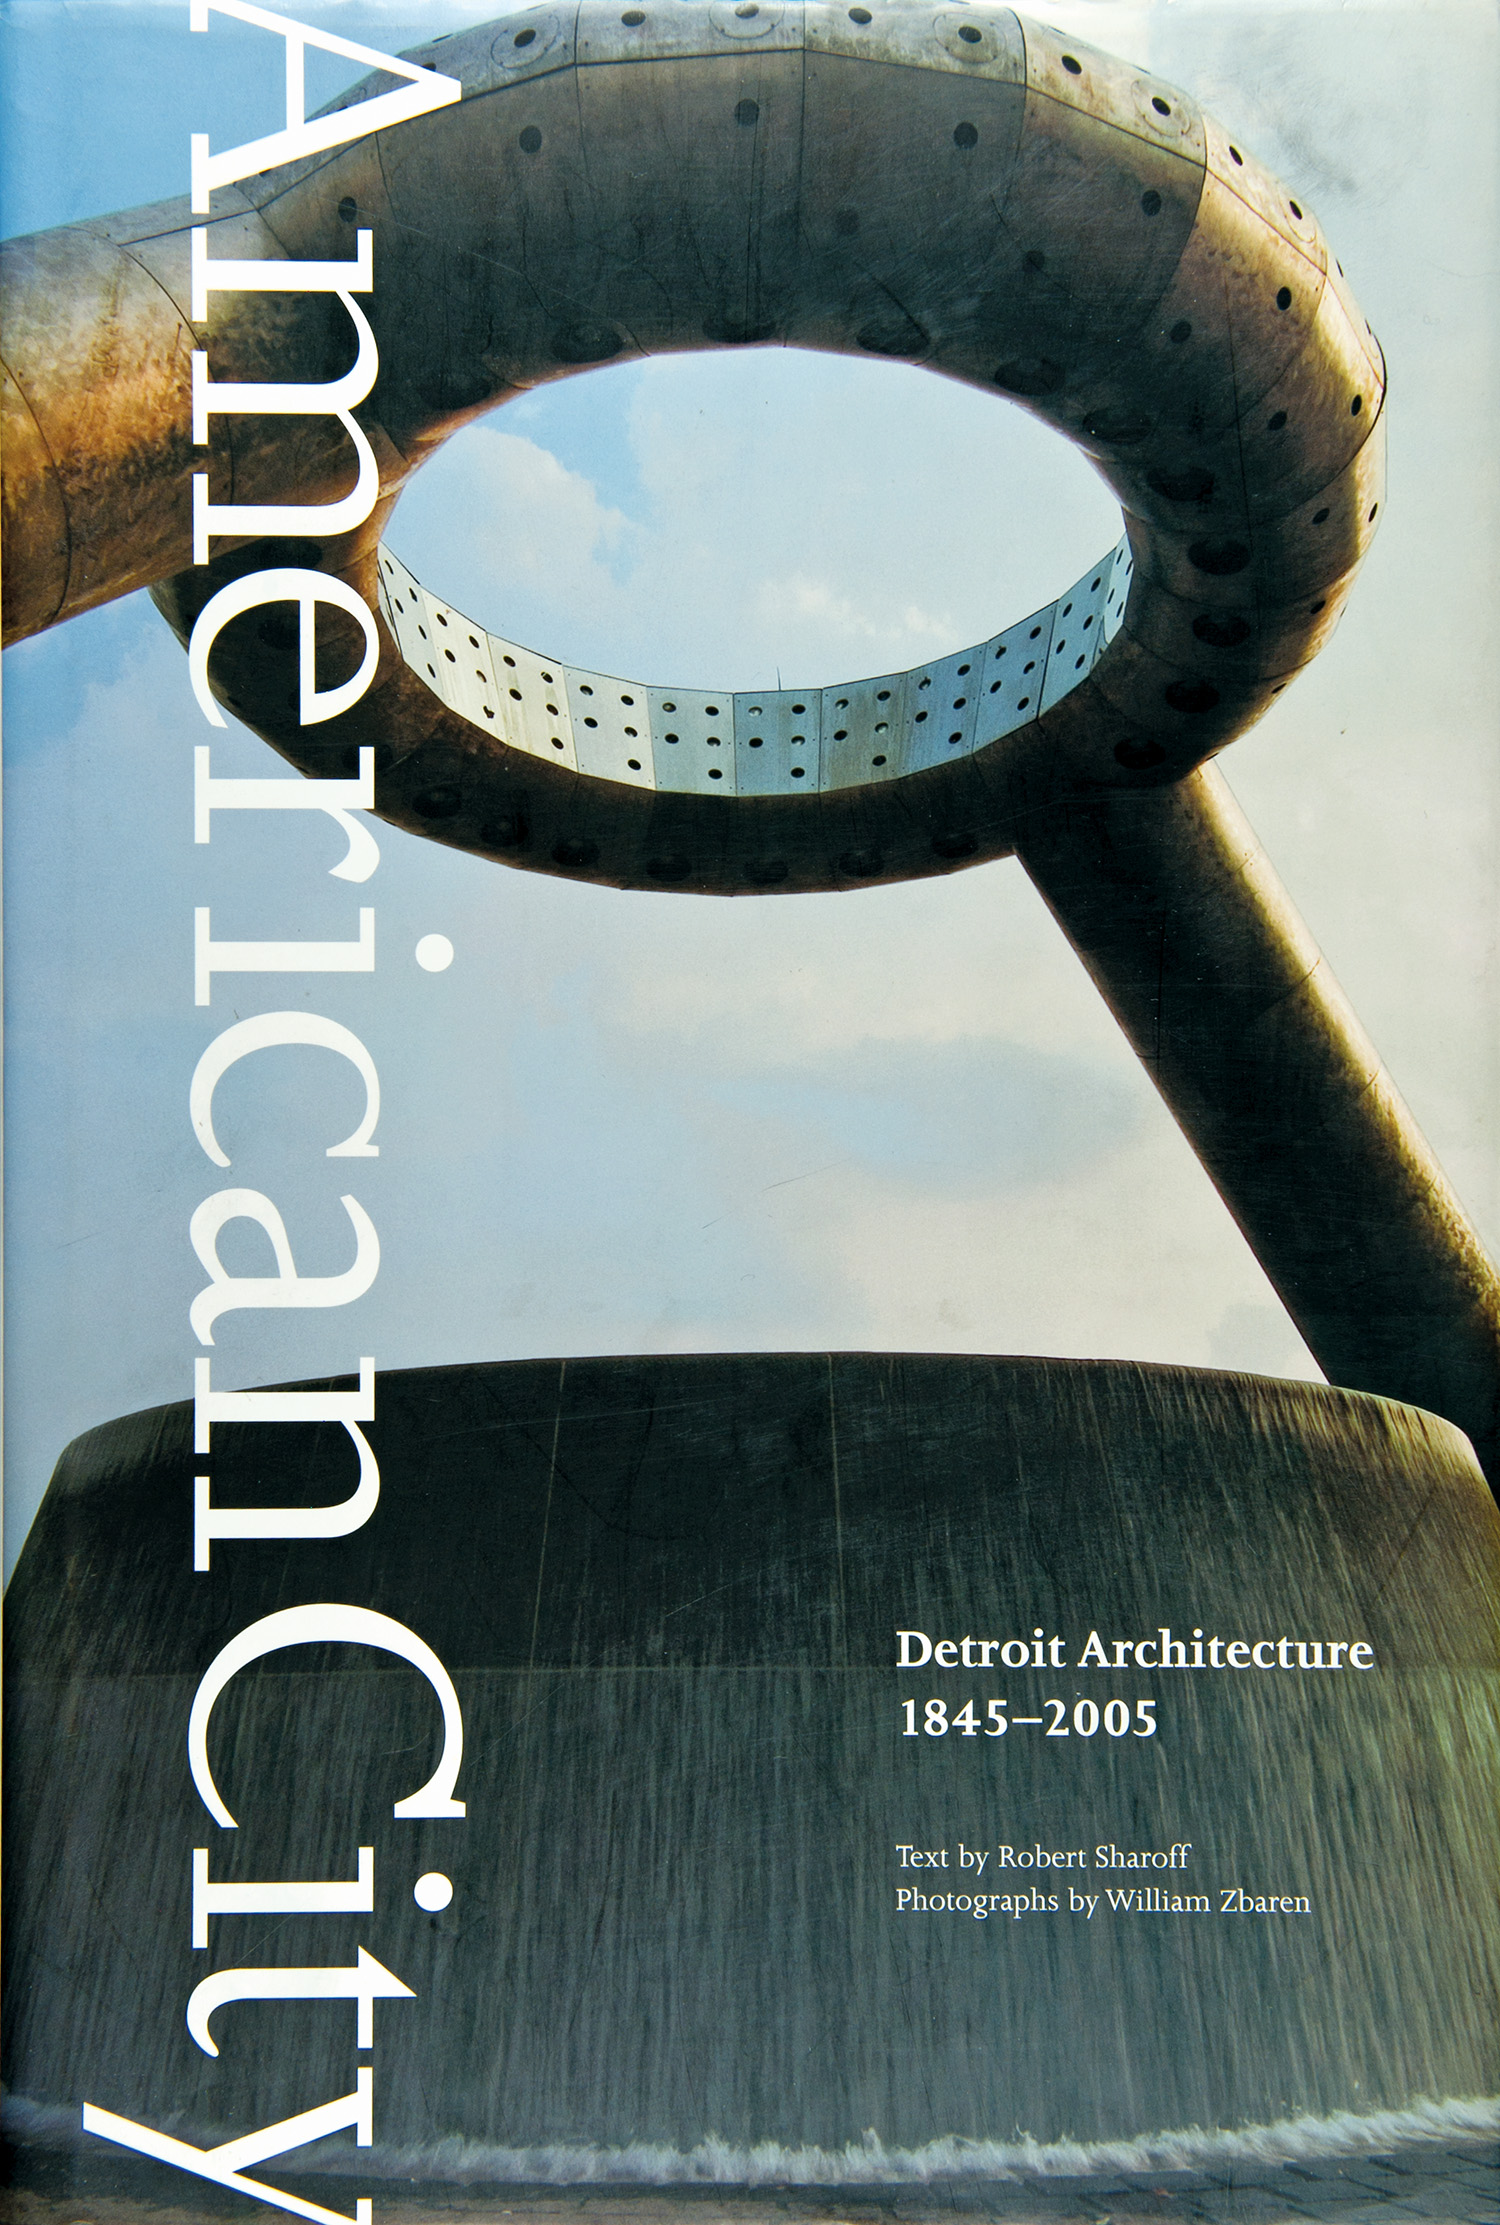 "American City: Detroit Architecture 1845-2005" / Photographs by Bill Zbaren / Text by Robert Sharoff / Published by the Wayne State University Press